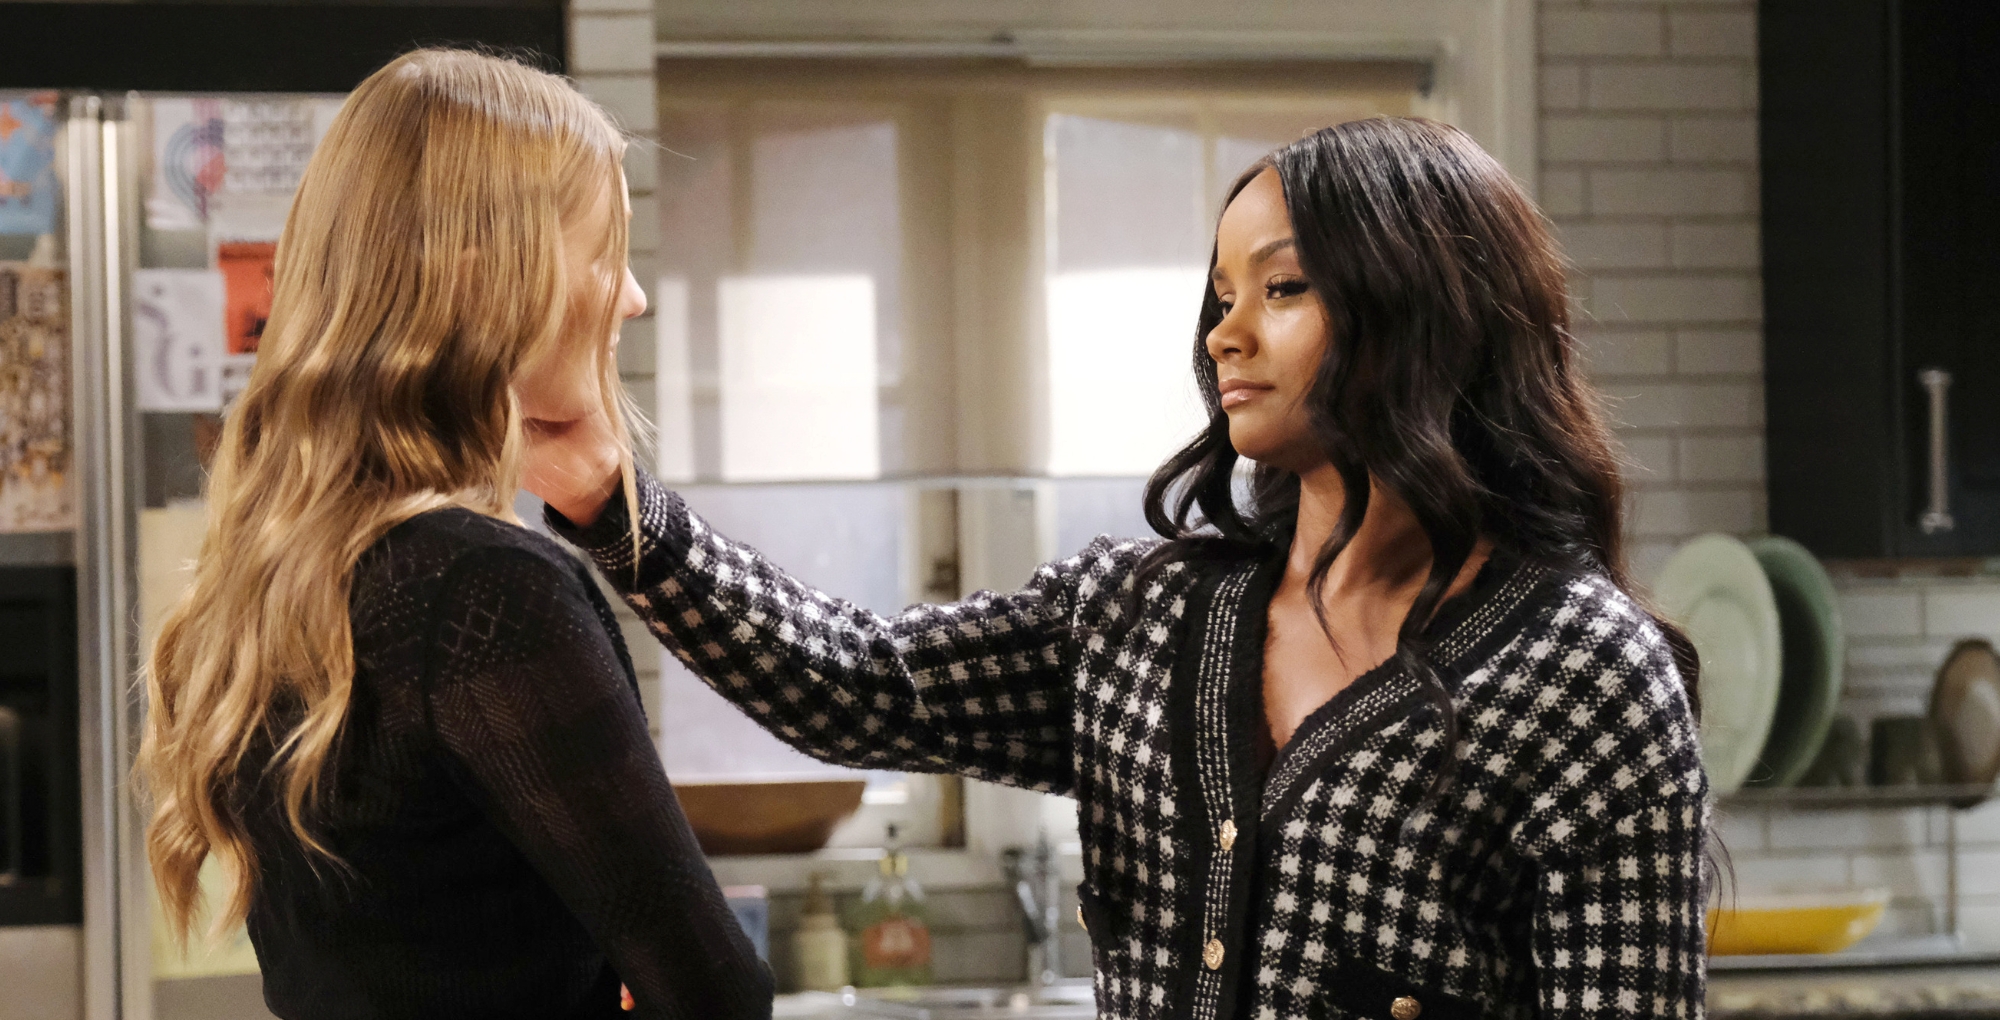 days of our lives spoilers for february 20, 2023 has chanel gently touching allie's face